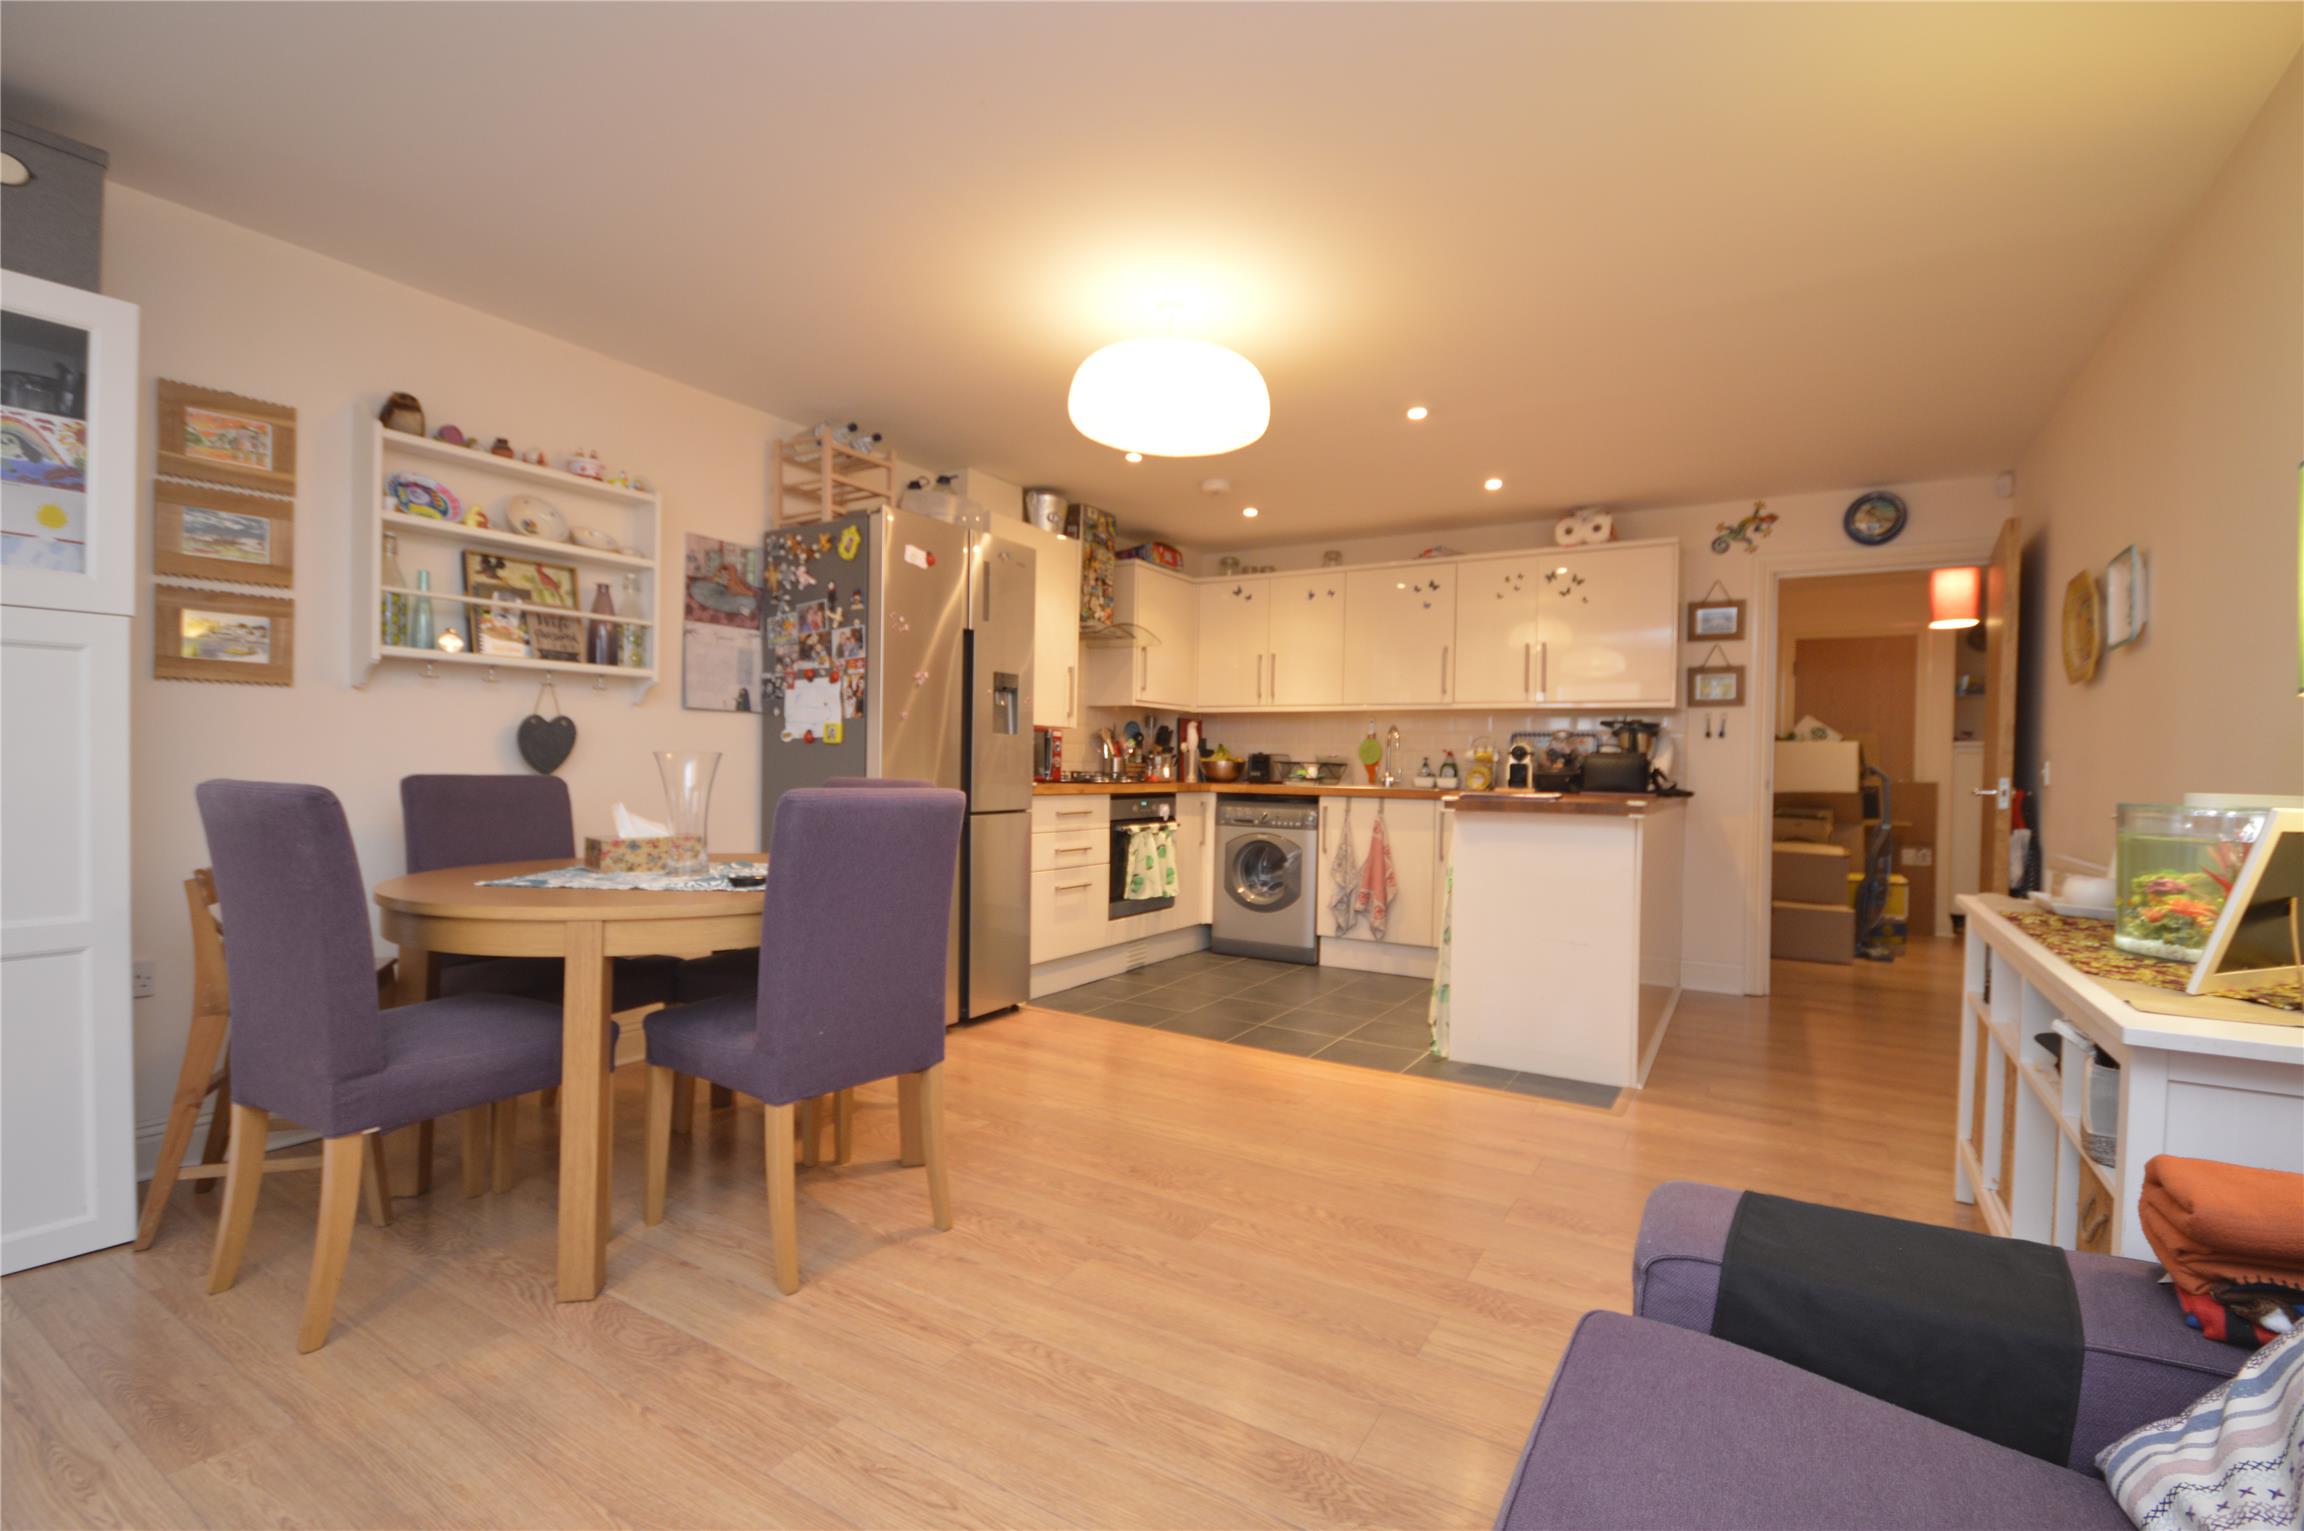 This lovely 2 bedroom property based in the heart of Clapham RoomsLocal image